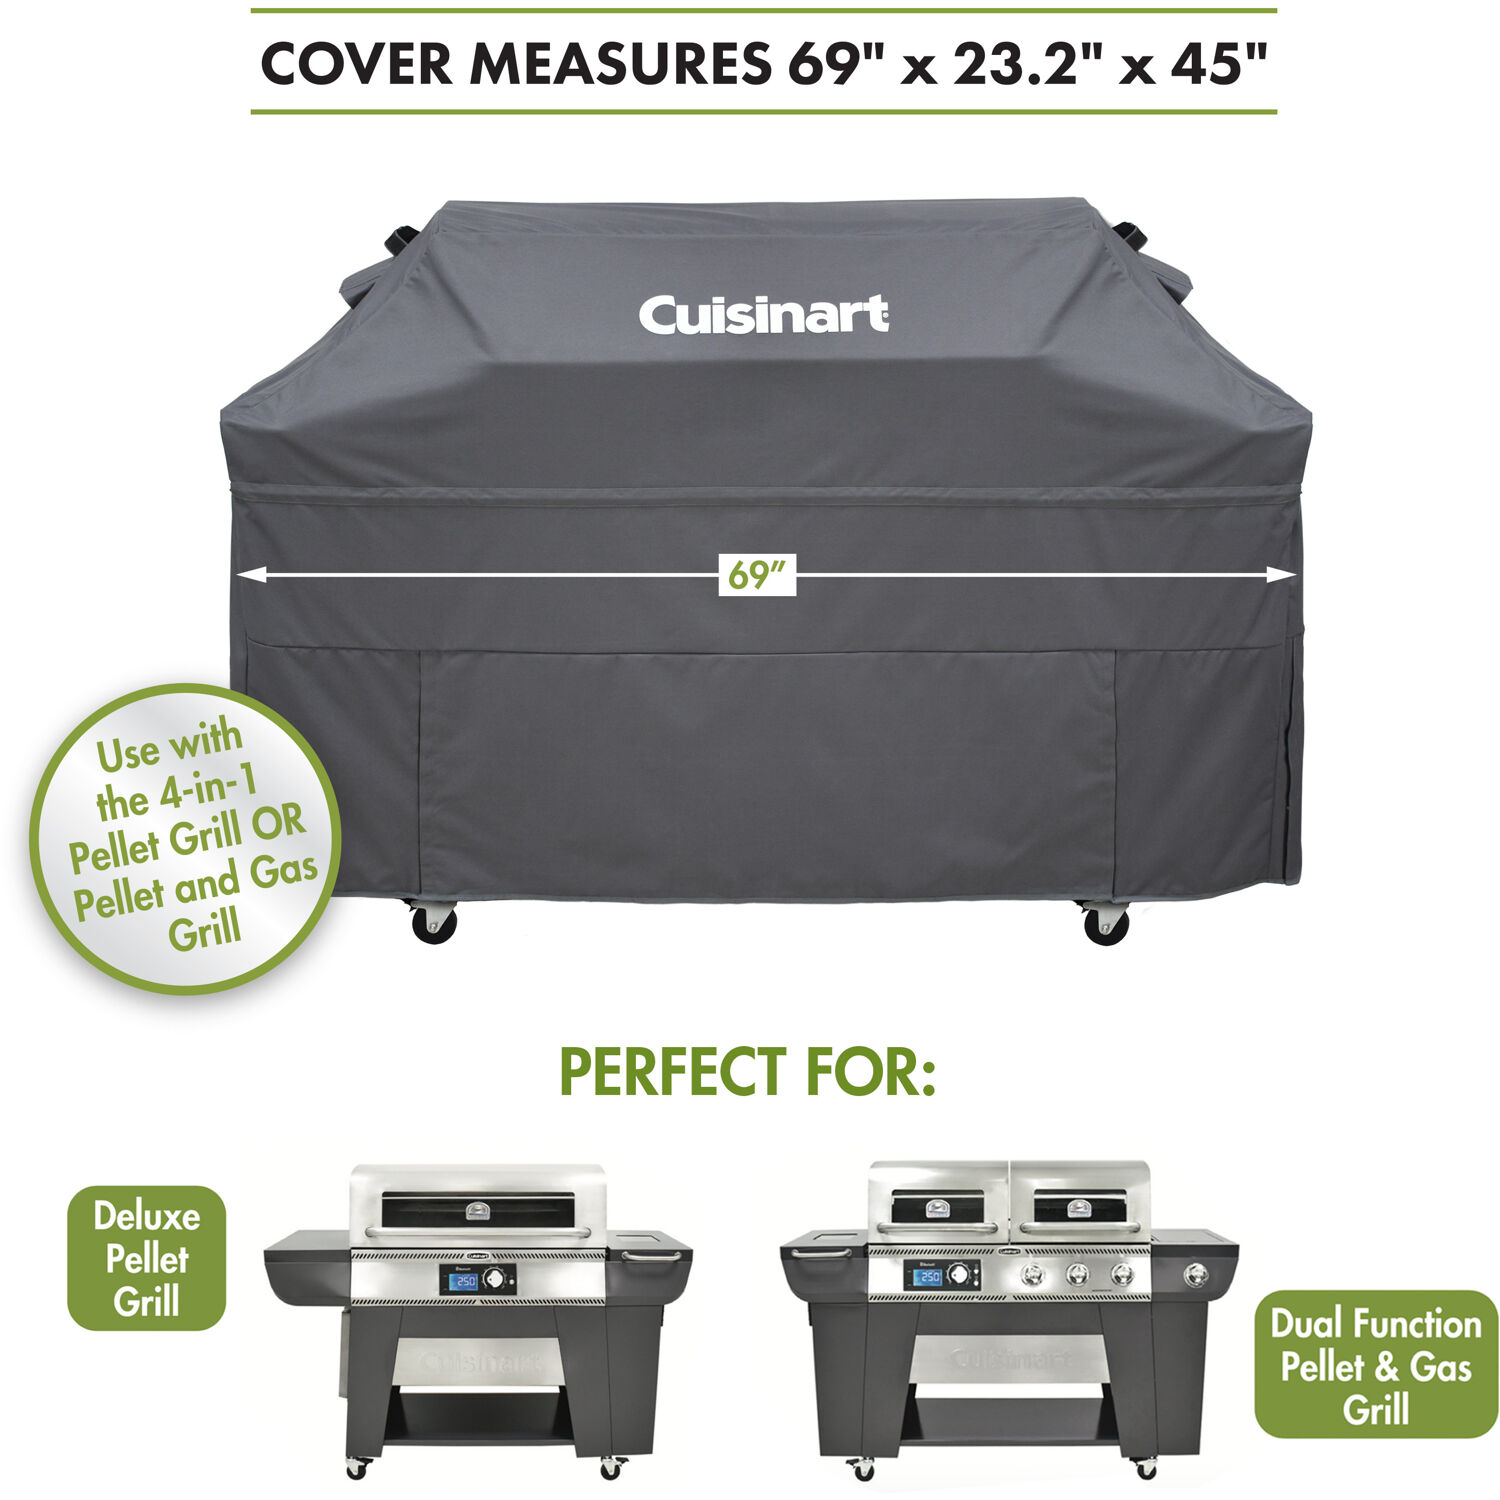 Cuisinart Pellet Grill Cover, Fits Woodcreek and Twin Oaks Pellet Grills - image 2 of 6